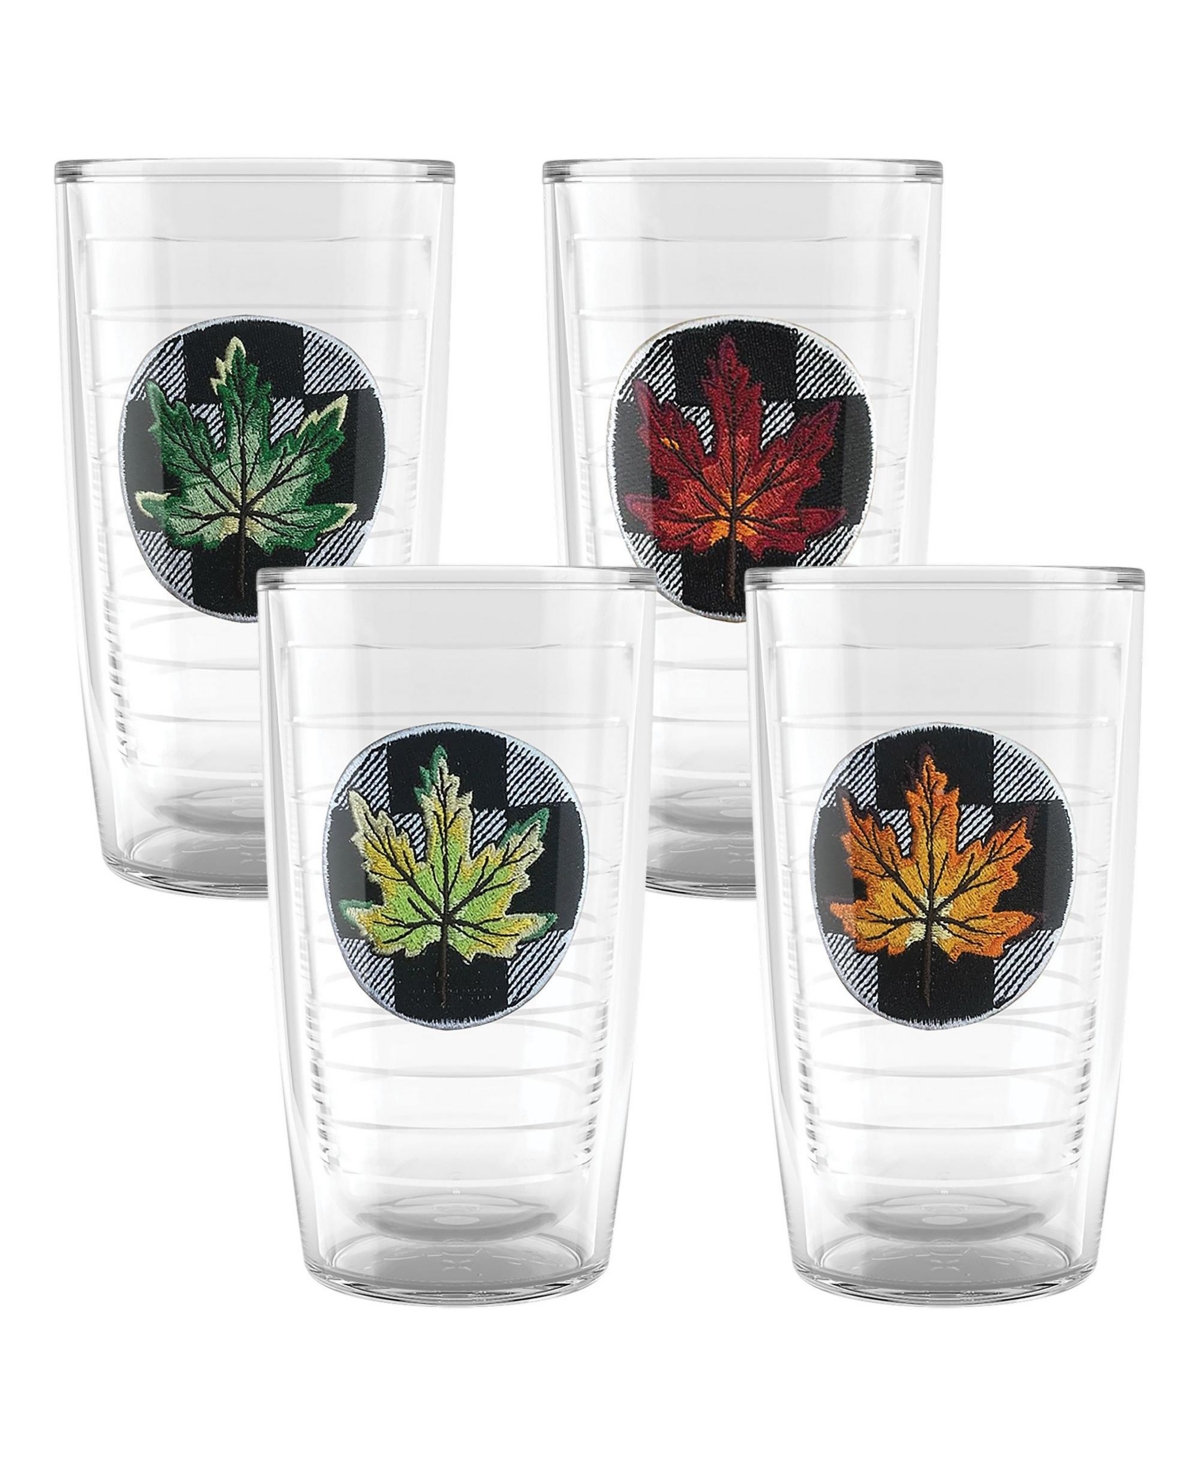 Tervis Tumbler Tervis Checkerboard Fall Leaf Made In Usa Double Walled Insulated Tumbler Travel Cup Keeps Drinks Co In Open Miscellaneous